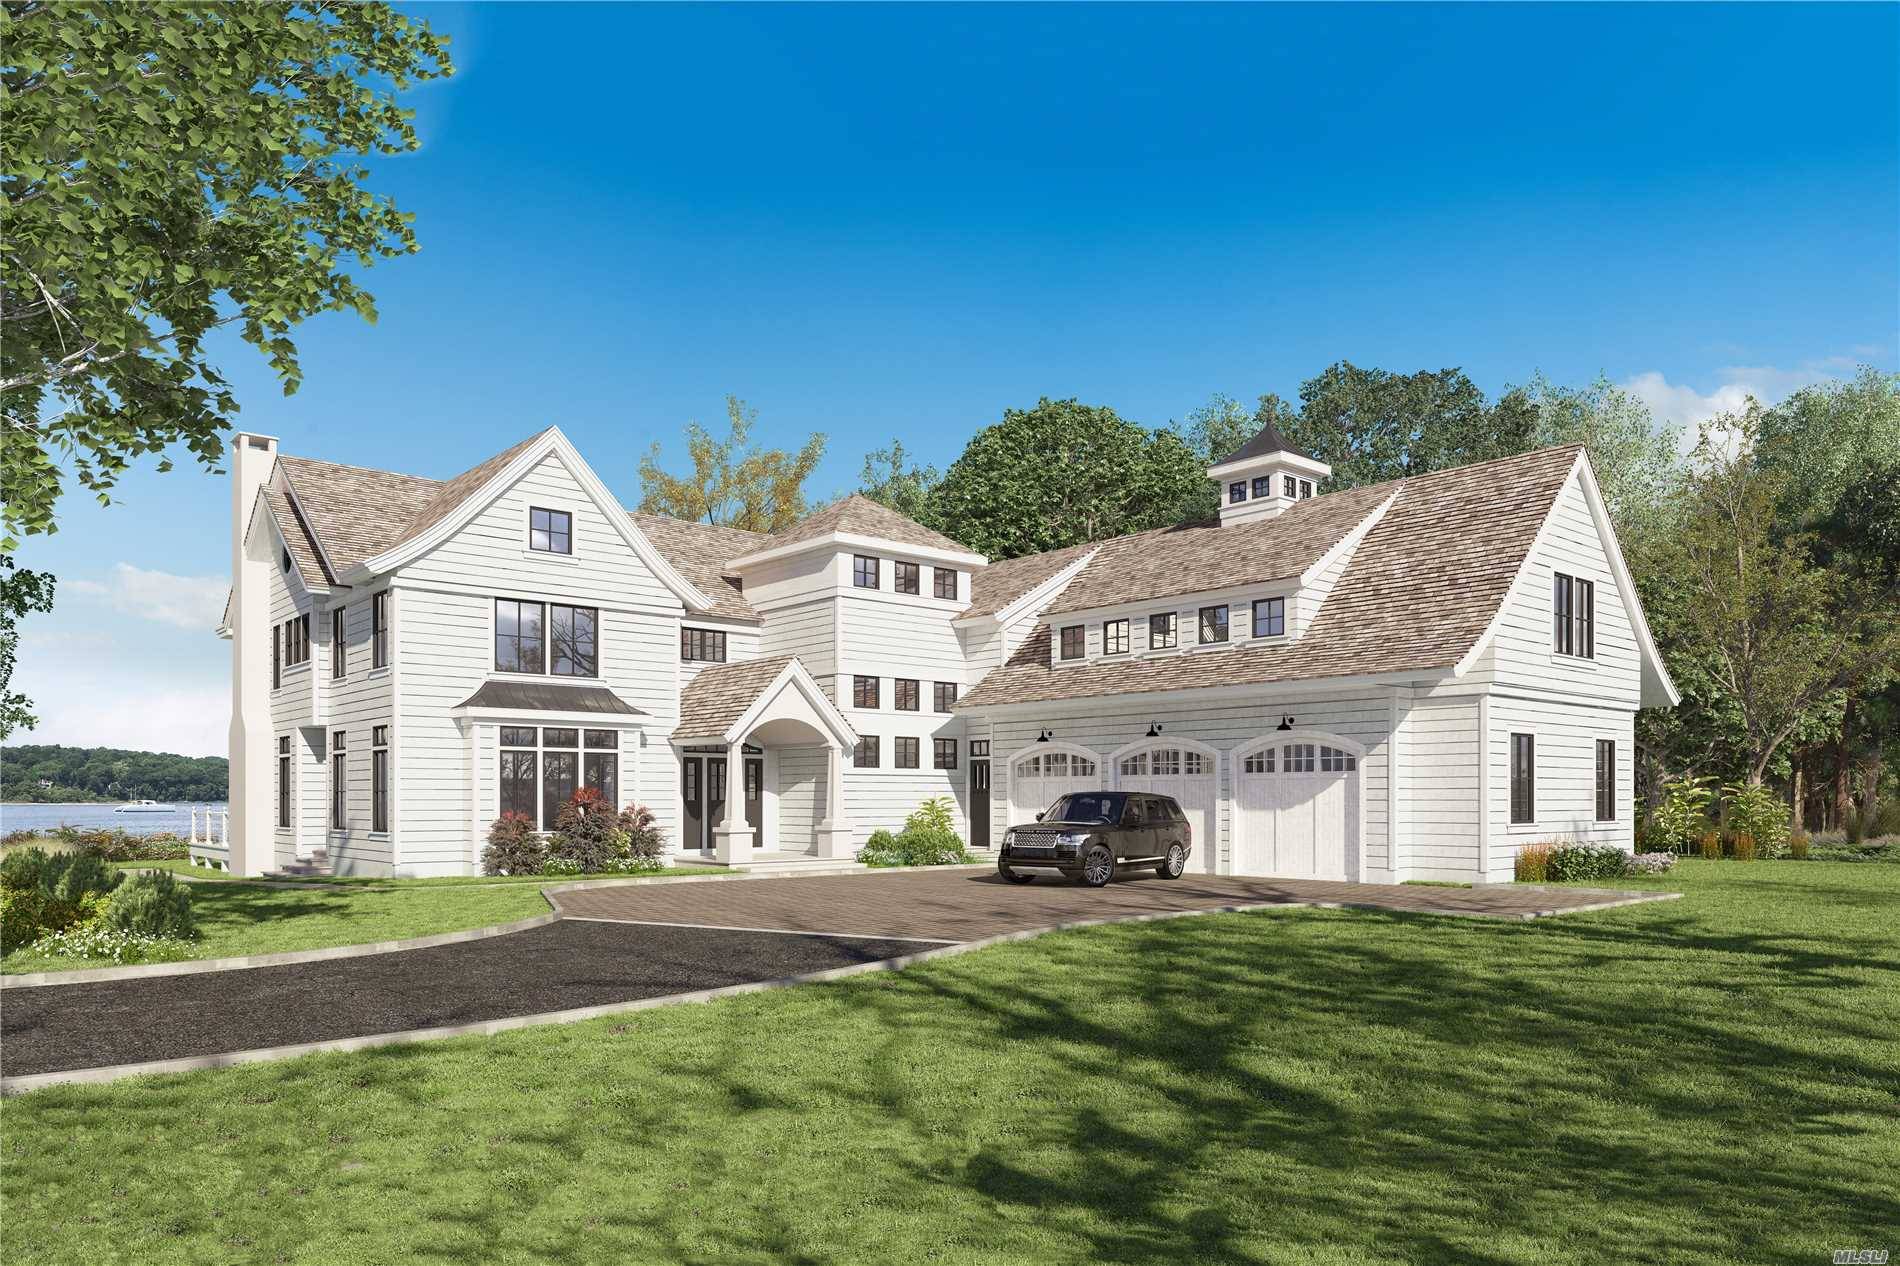 Great Time To Build An Exceptional Modern Home To Be Built On Northport Harbor In Northport Village, No Flood Insurance Needed.